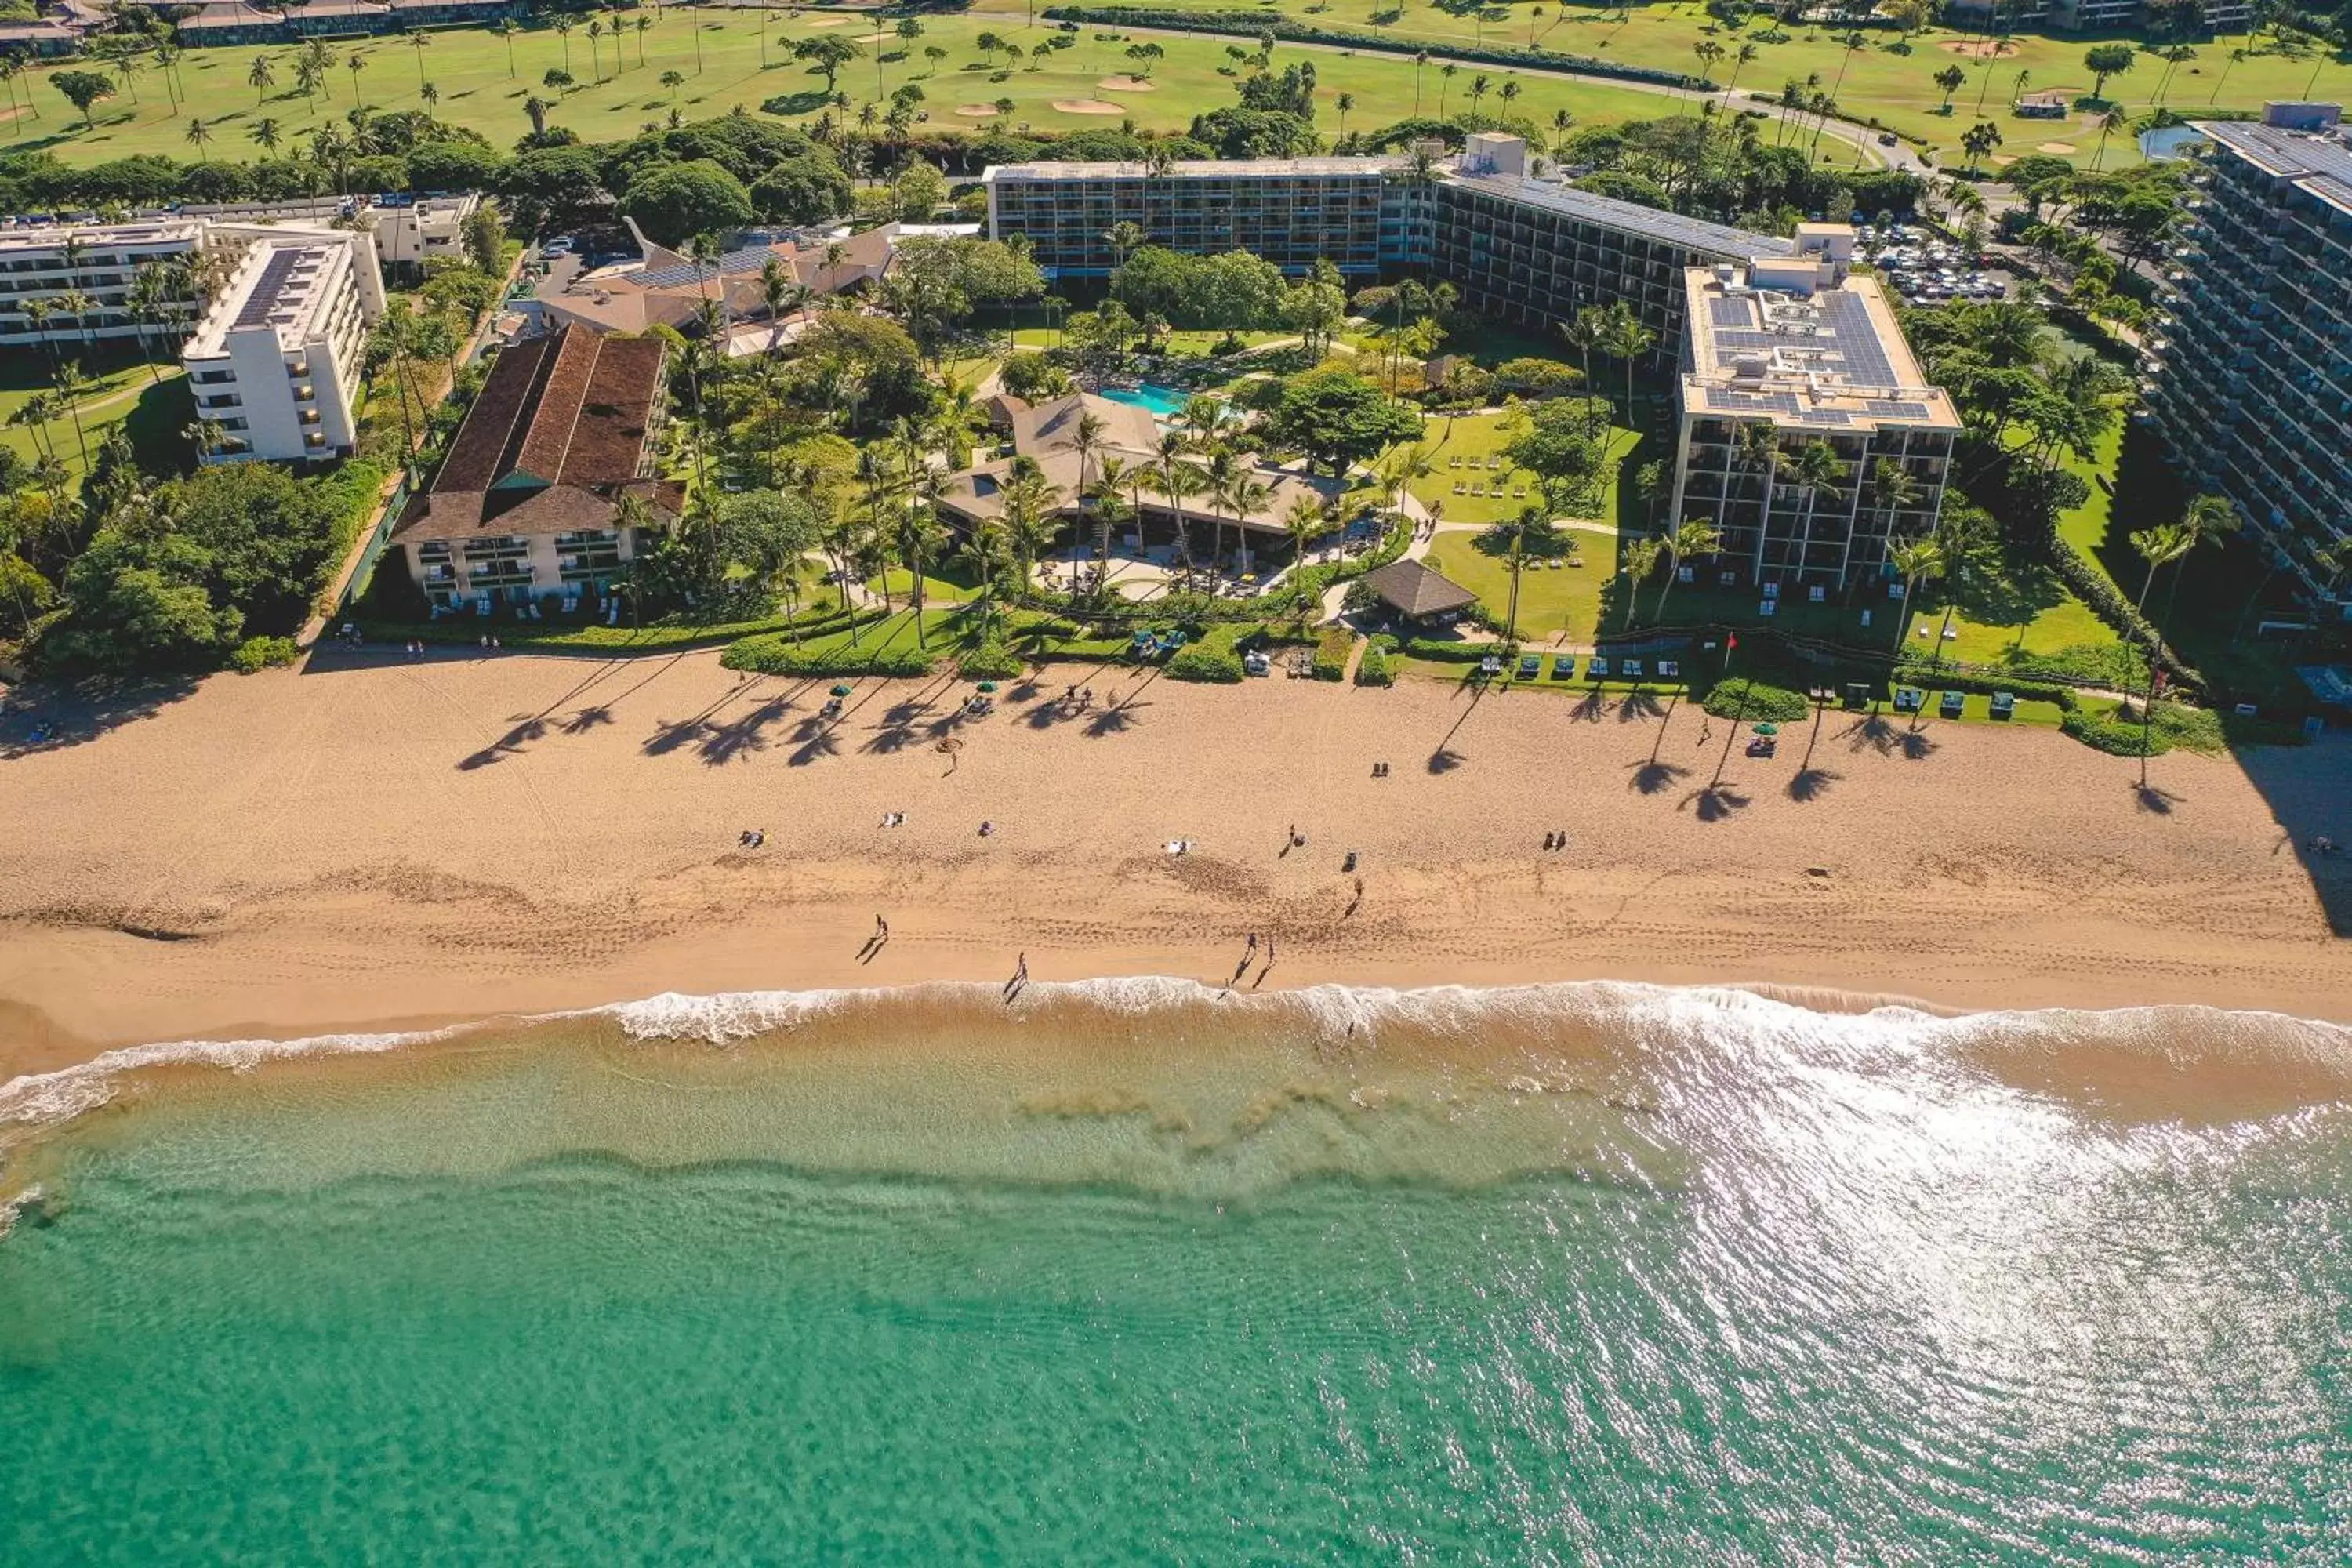 Property building, Bird's-eye View in OUTRIGGER Kāʻanapali Beach Resort